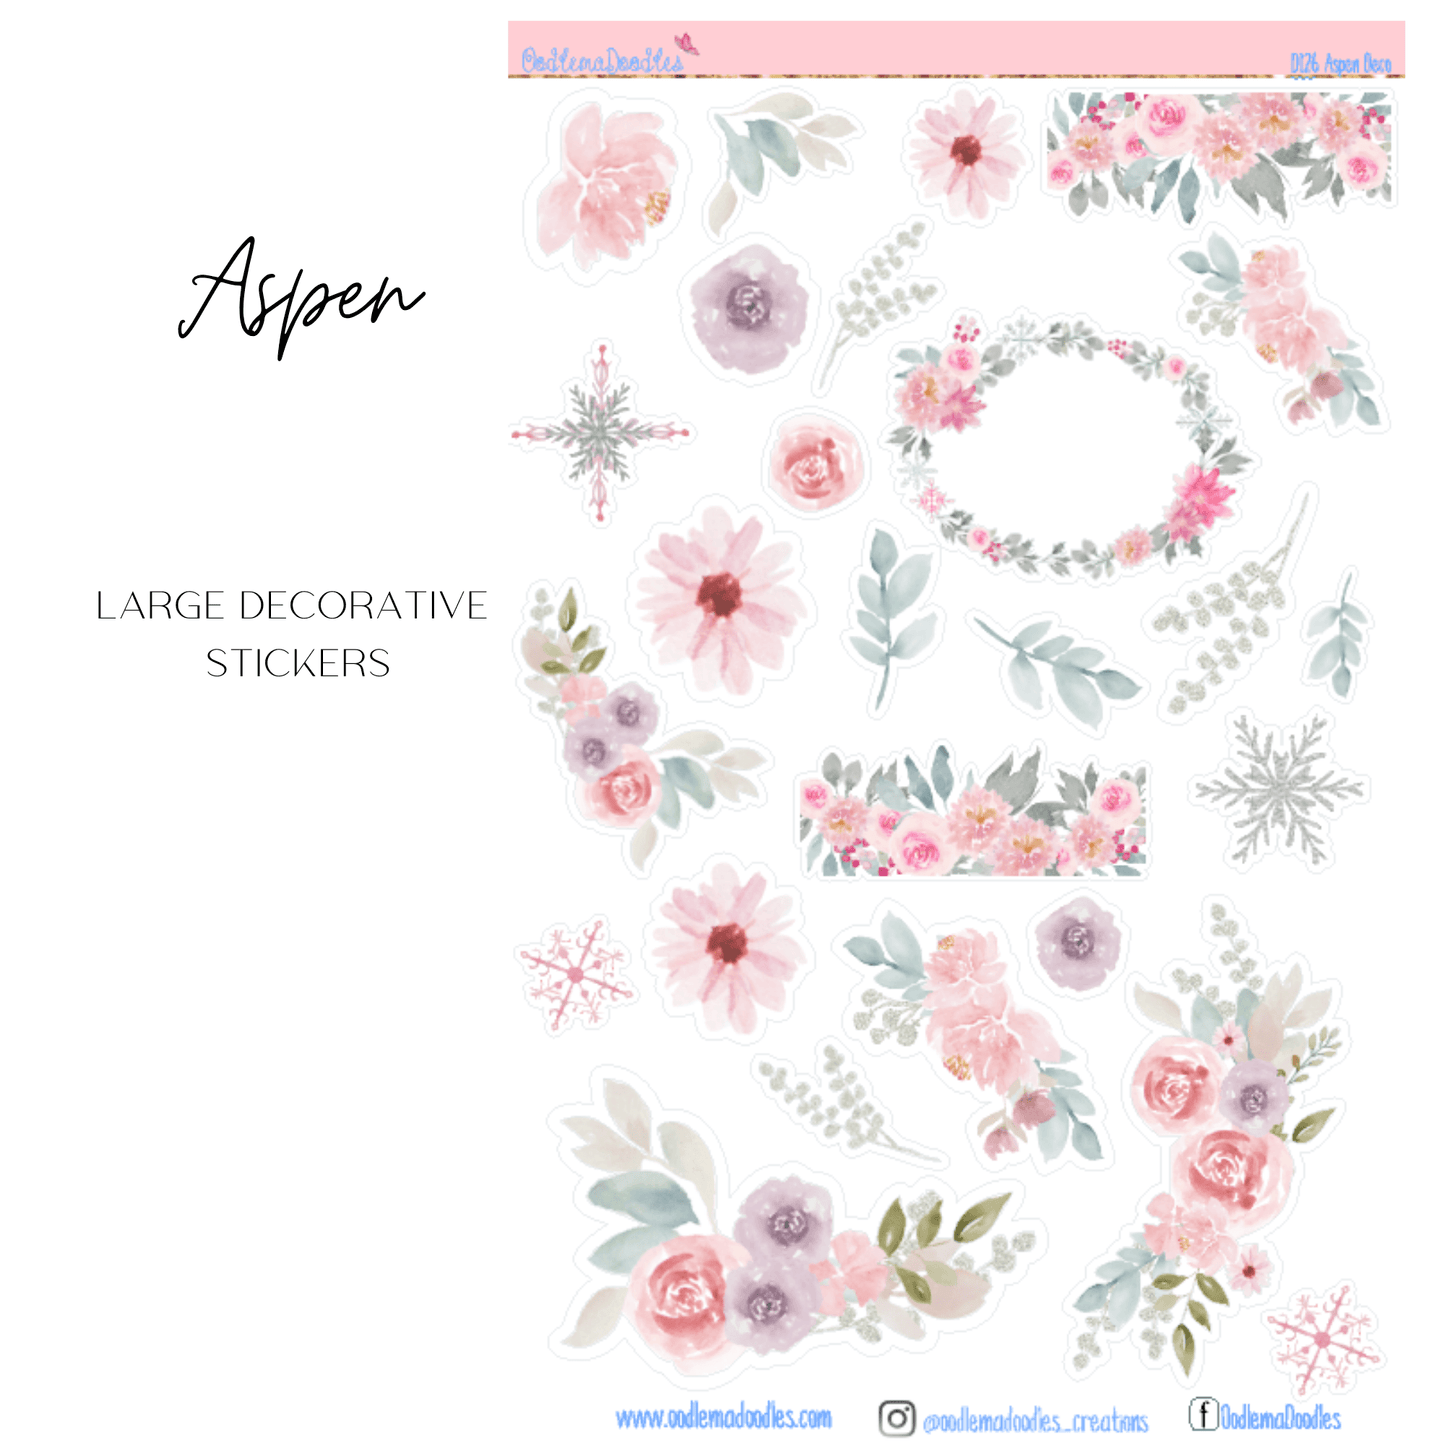 Aspen Large Decorative Planner Stickers - oodlemadoodles